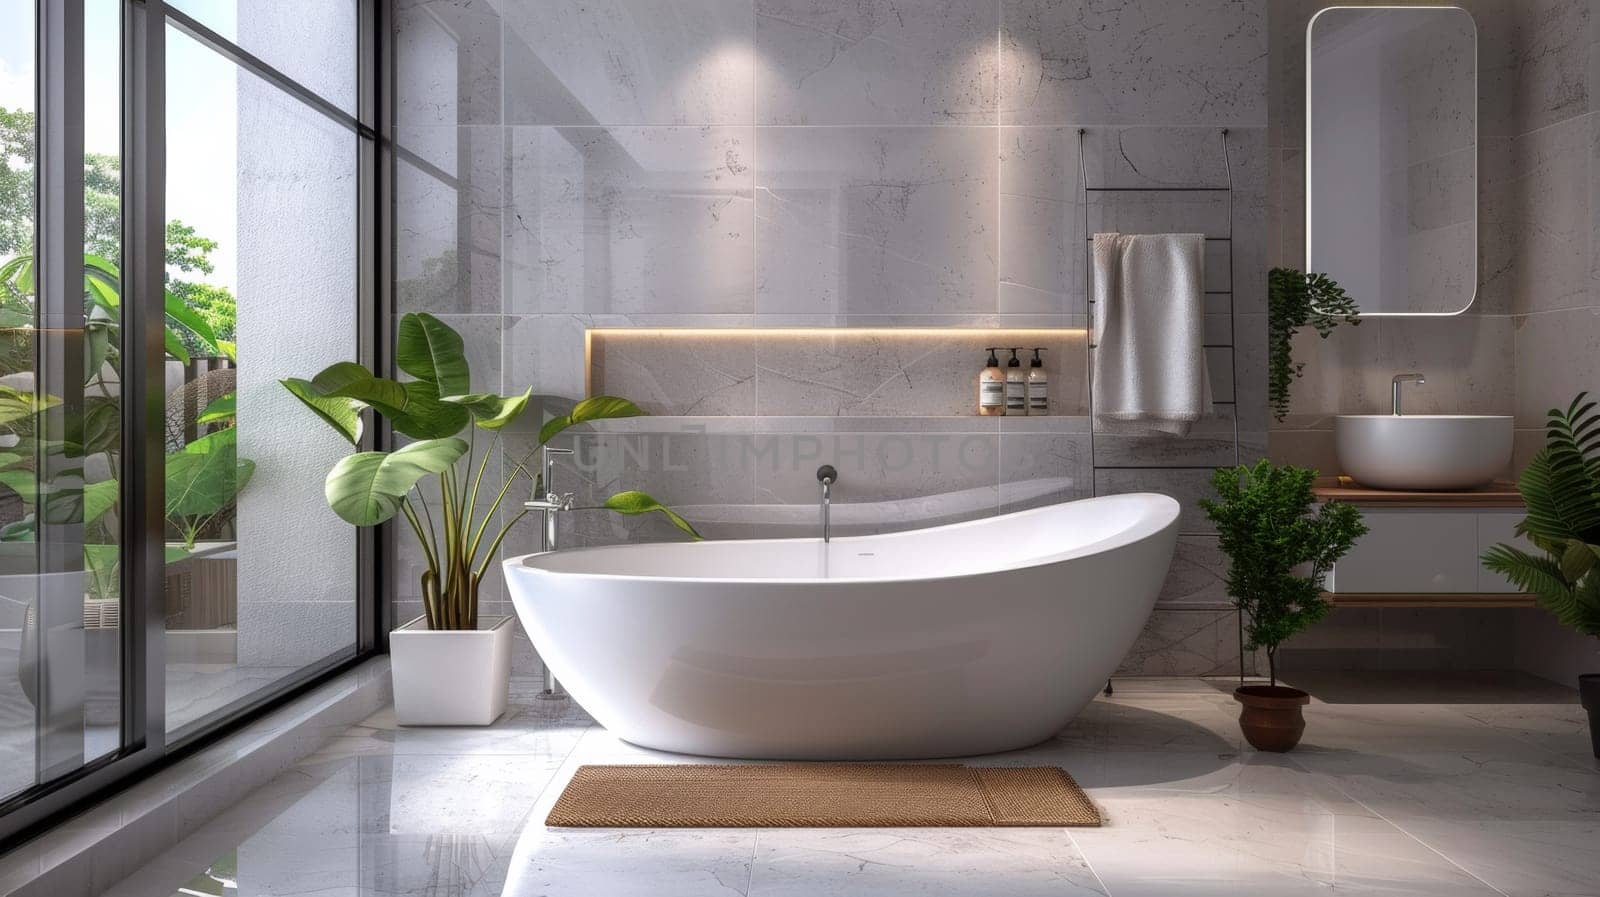 A bathroom with a large bathtub and plants in the corner